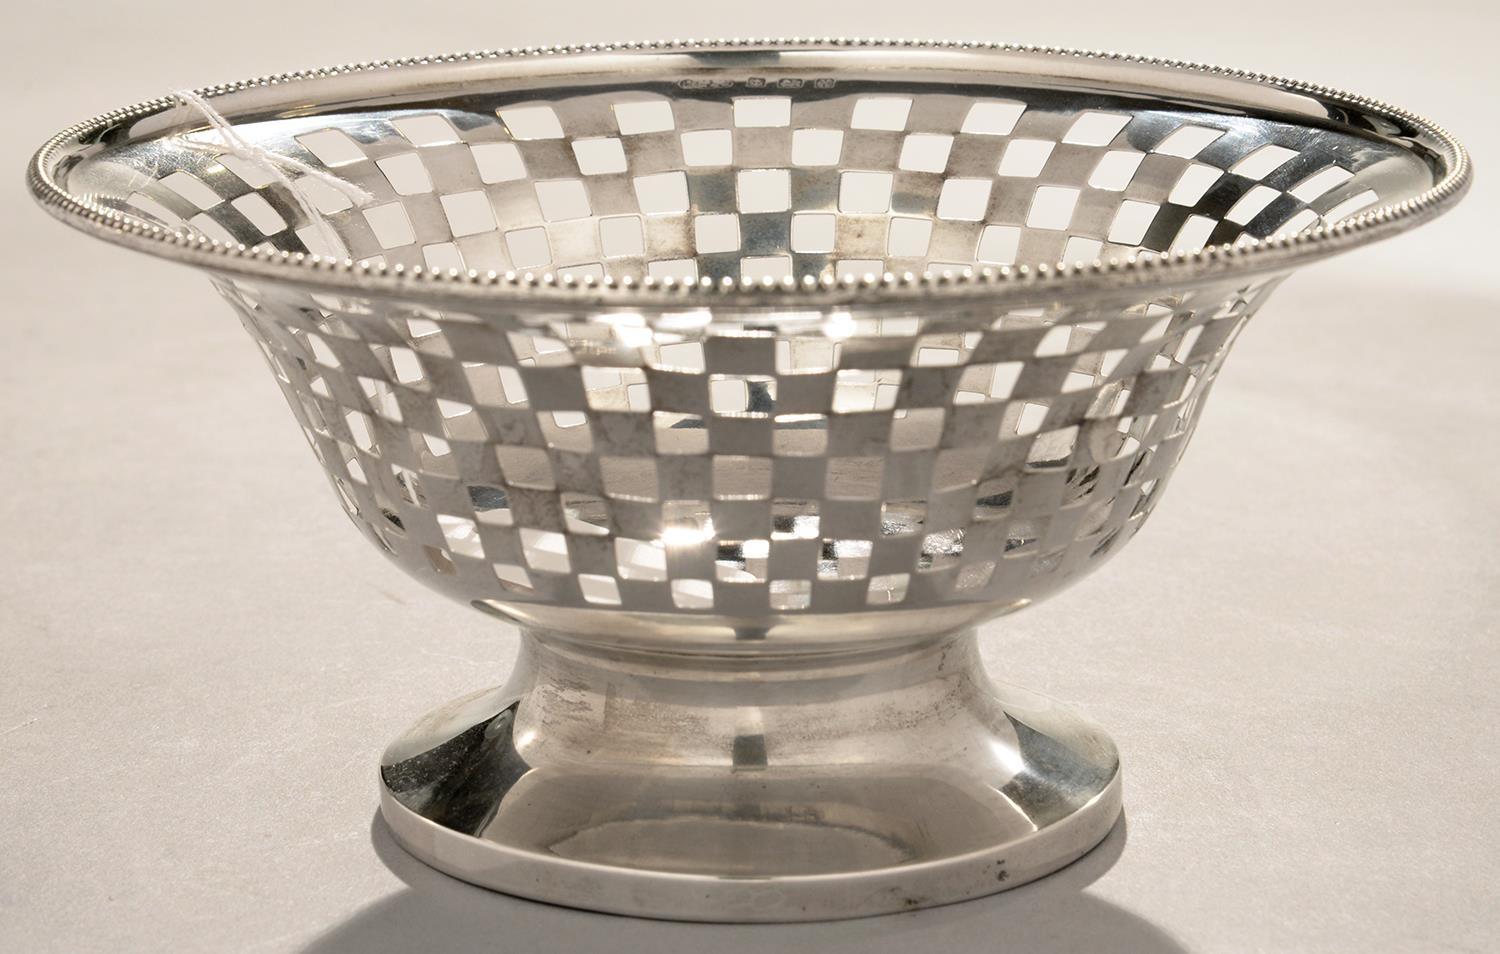 A GEORGE V PIERCED SILVER FRUIT BOWL WITH BEADED RIM, 20CM D, BY J. GLOSTER AND SONS LIMITED,